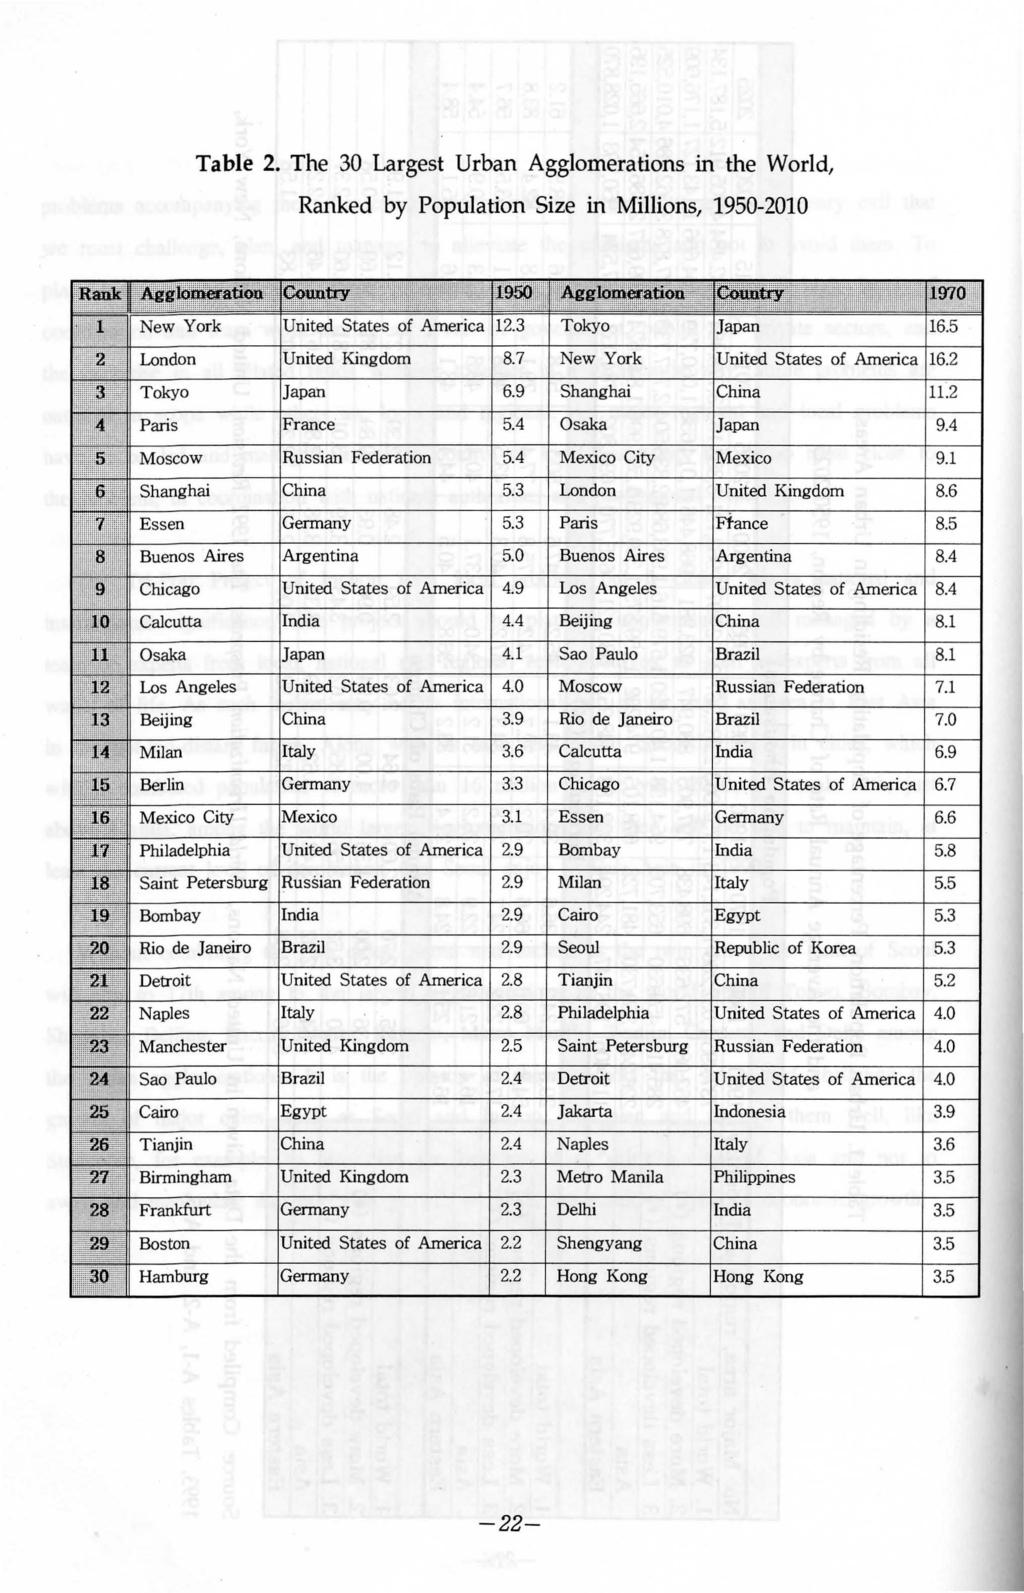 Table 2. The 30 Largest Urban Agglomerations in the World, Ranked by Population Size in Millions, 1950-2010 8.7 New York 6.9 Shanghai 5.4 Osaka 5.4 Mexico City 5.3 London 5.3 Paris 5.